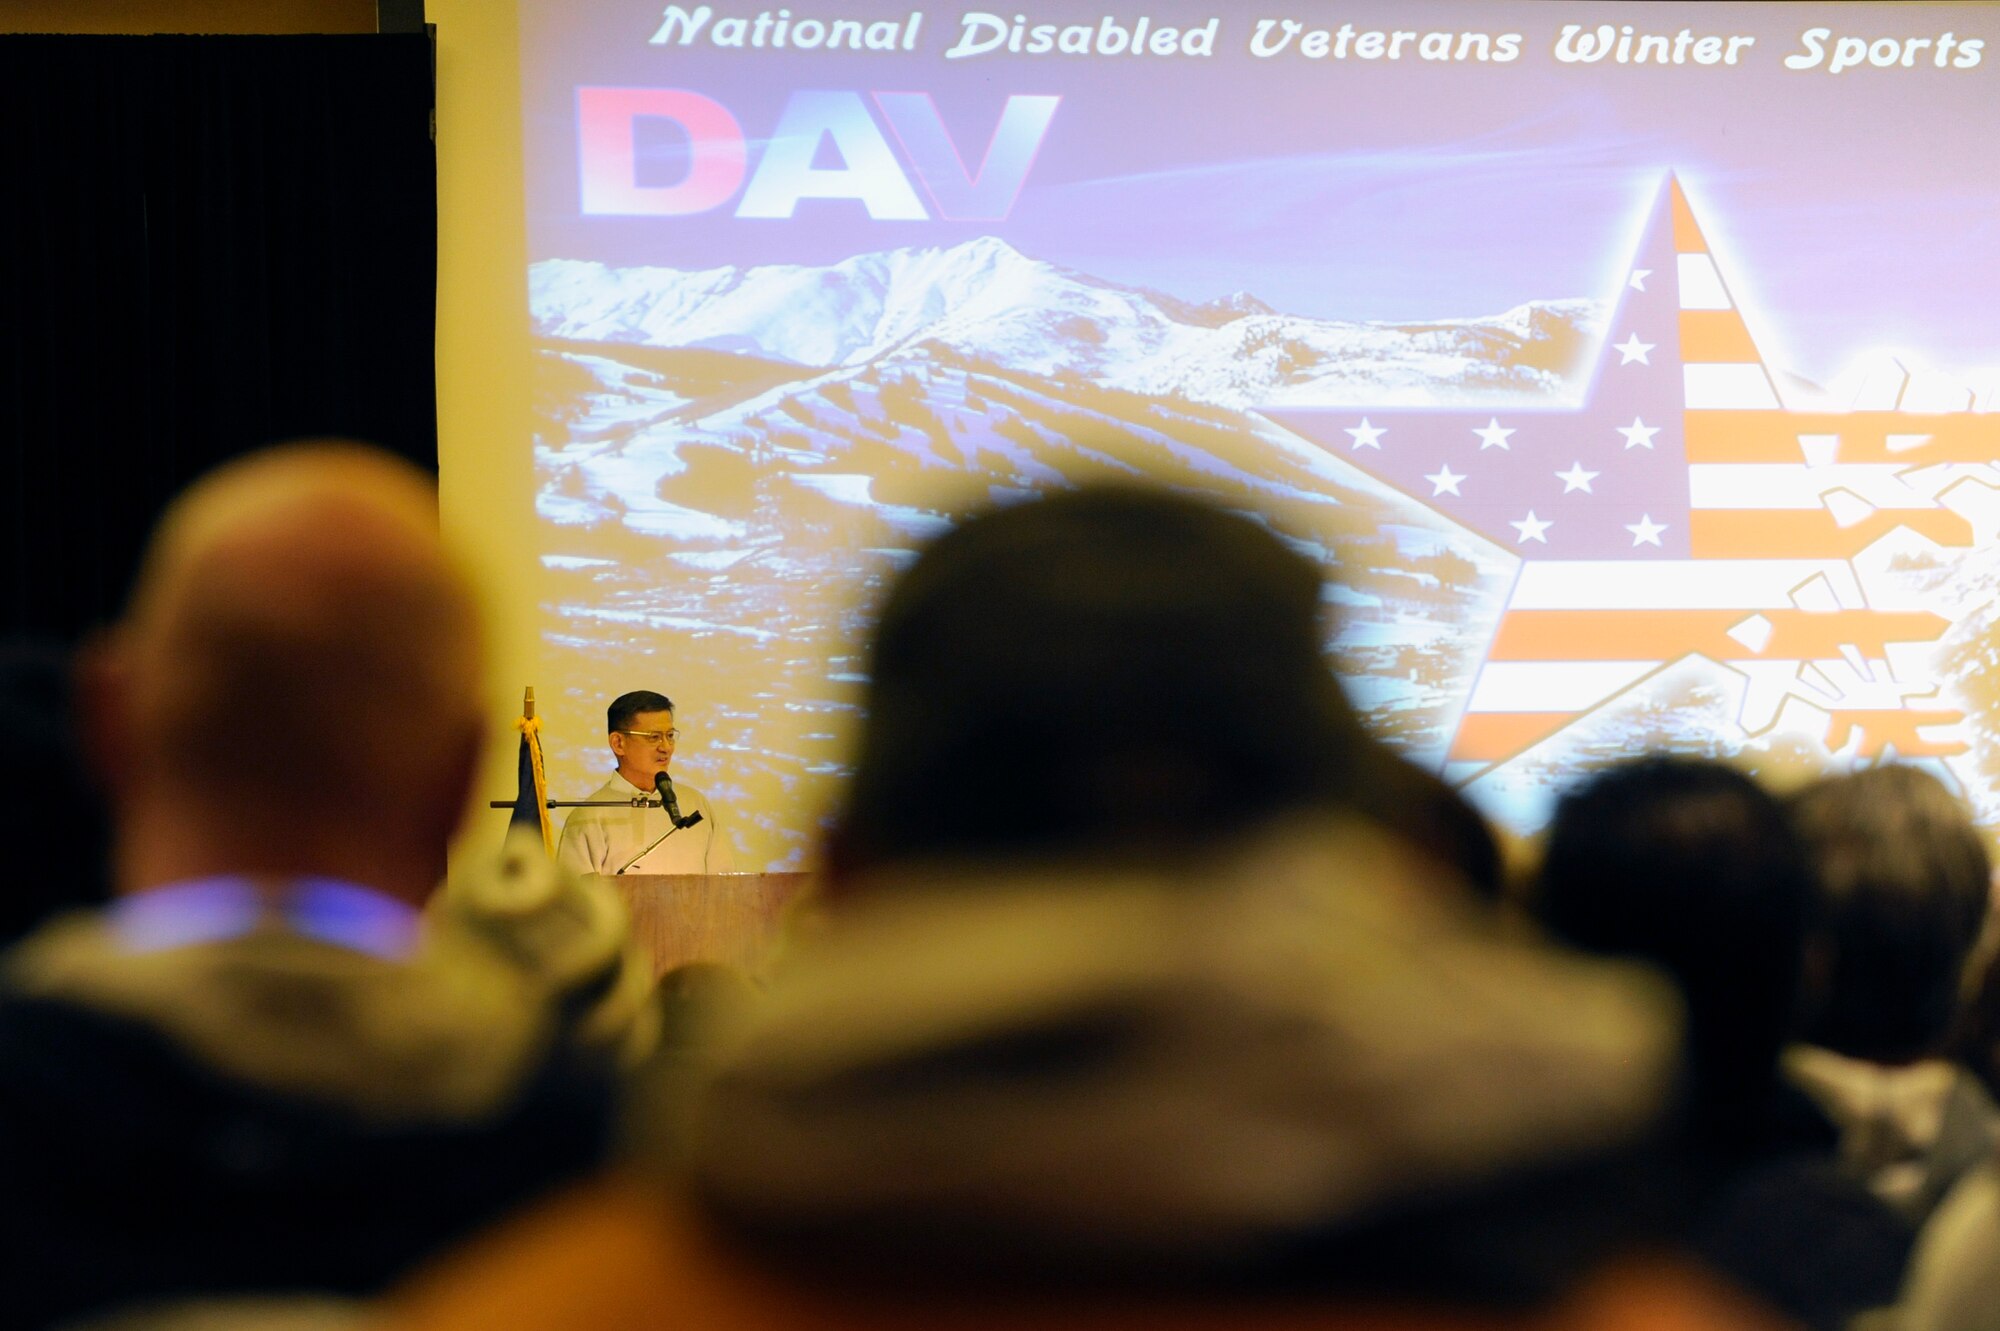 Secretary of Veterans Affairs Eric K. Shinseki gave opening remarks during the opening ceremony inside The Silver Tree Hotel March 29 for the 23rd National Disabled American Veterans Winter Sports Clinic in Snowmass Village, Colo. The event is sponsored by the Department of Veterans Affairs and Disabled American Veterans. (U.S. Air Force photo/Staff Sgt. Desiree N. Palacios)